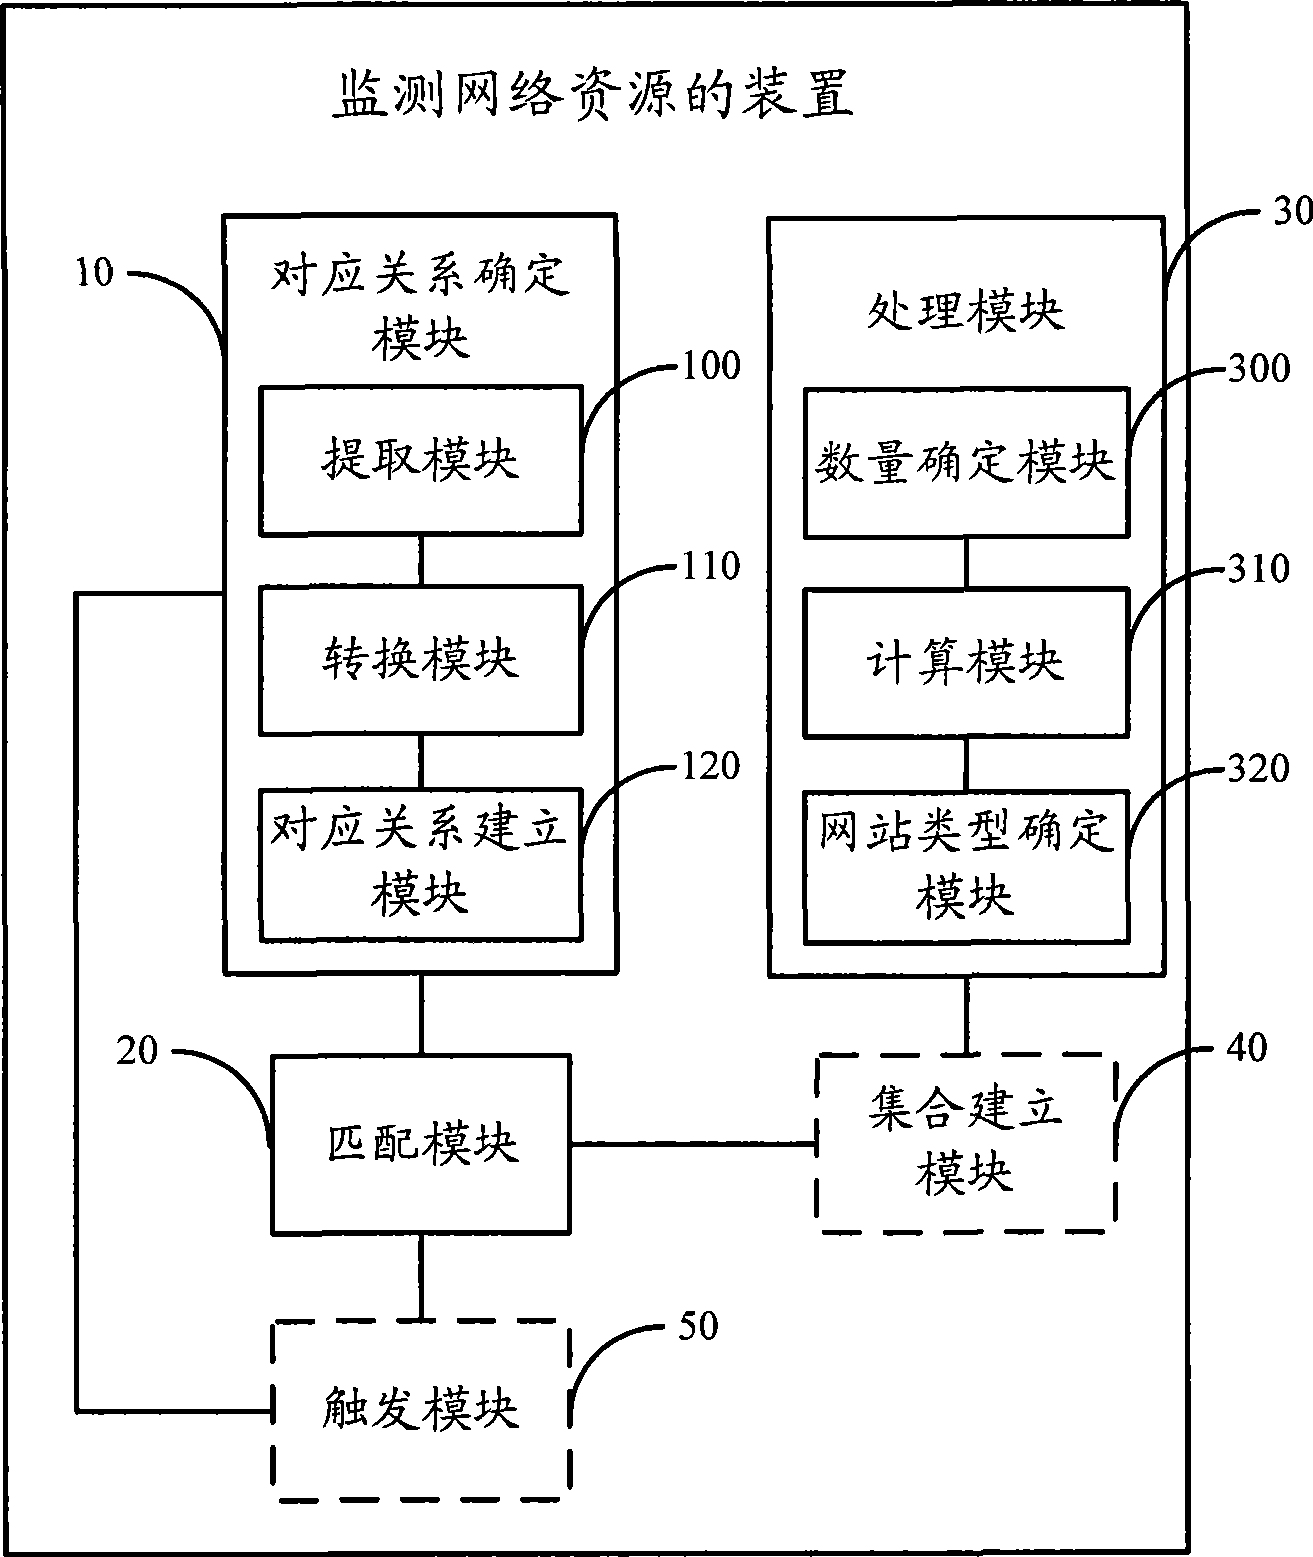 Method and apparatus for confirming website type